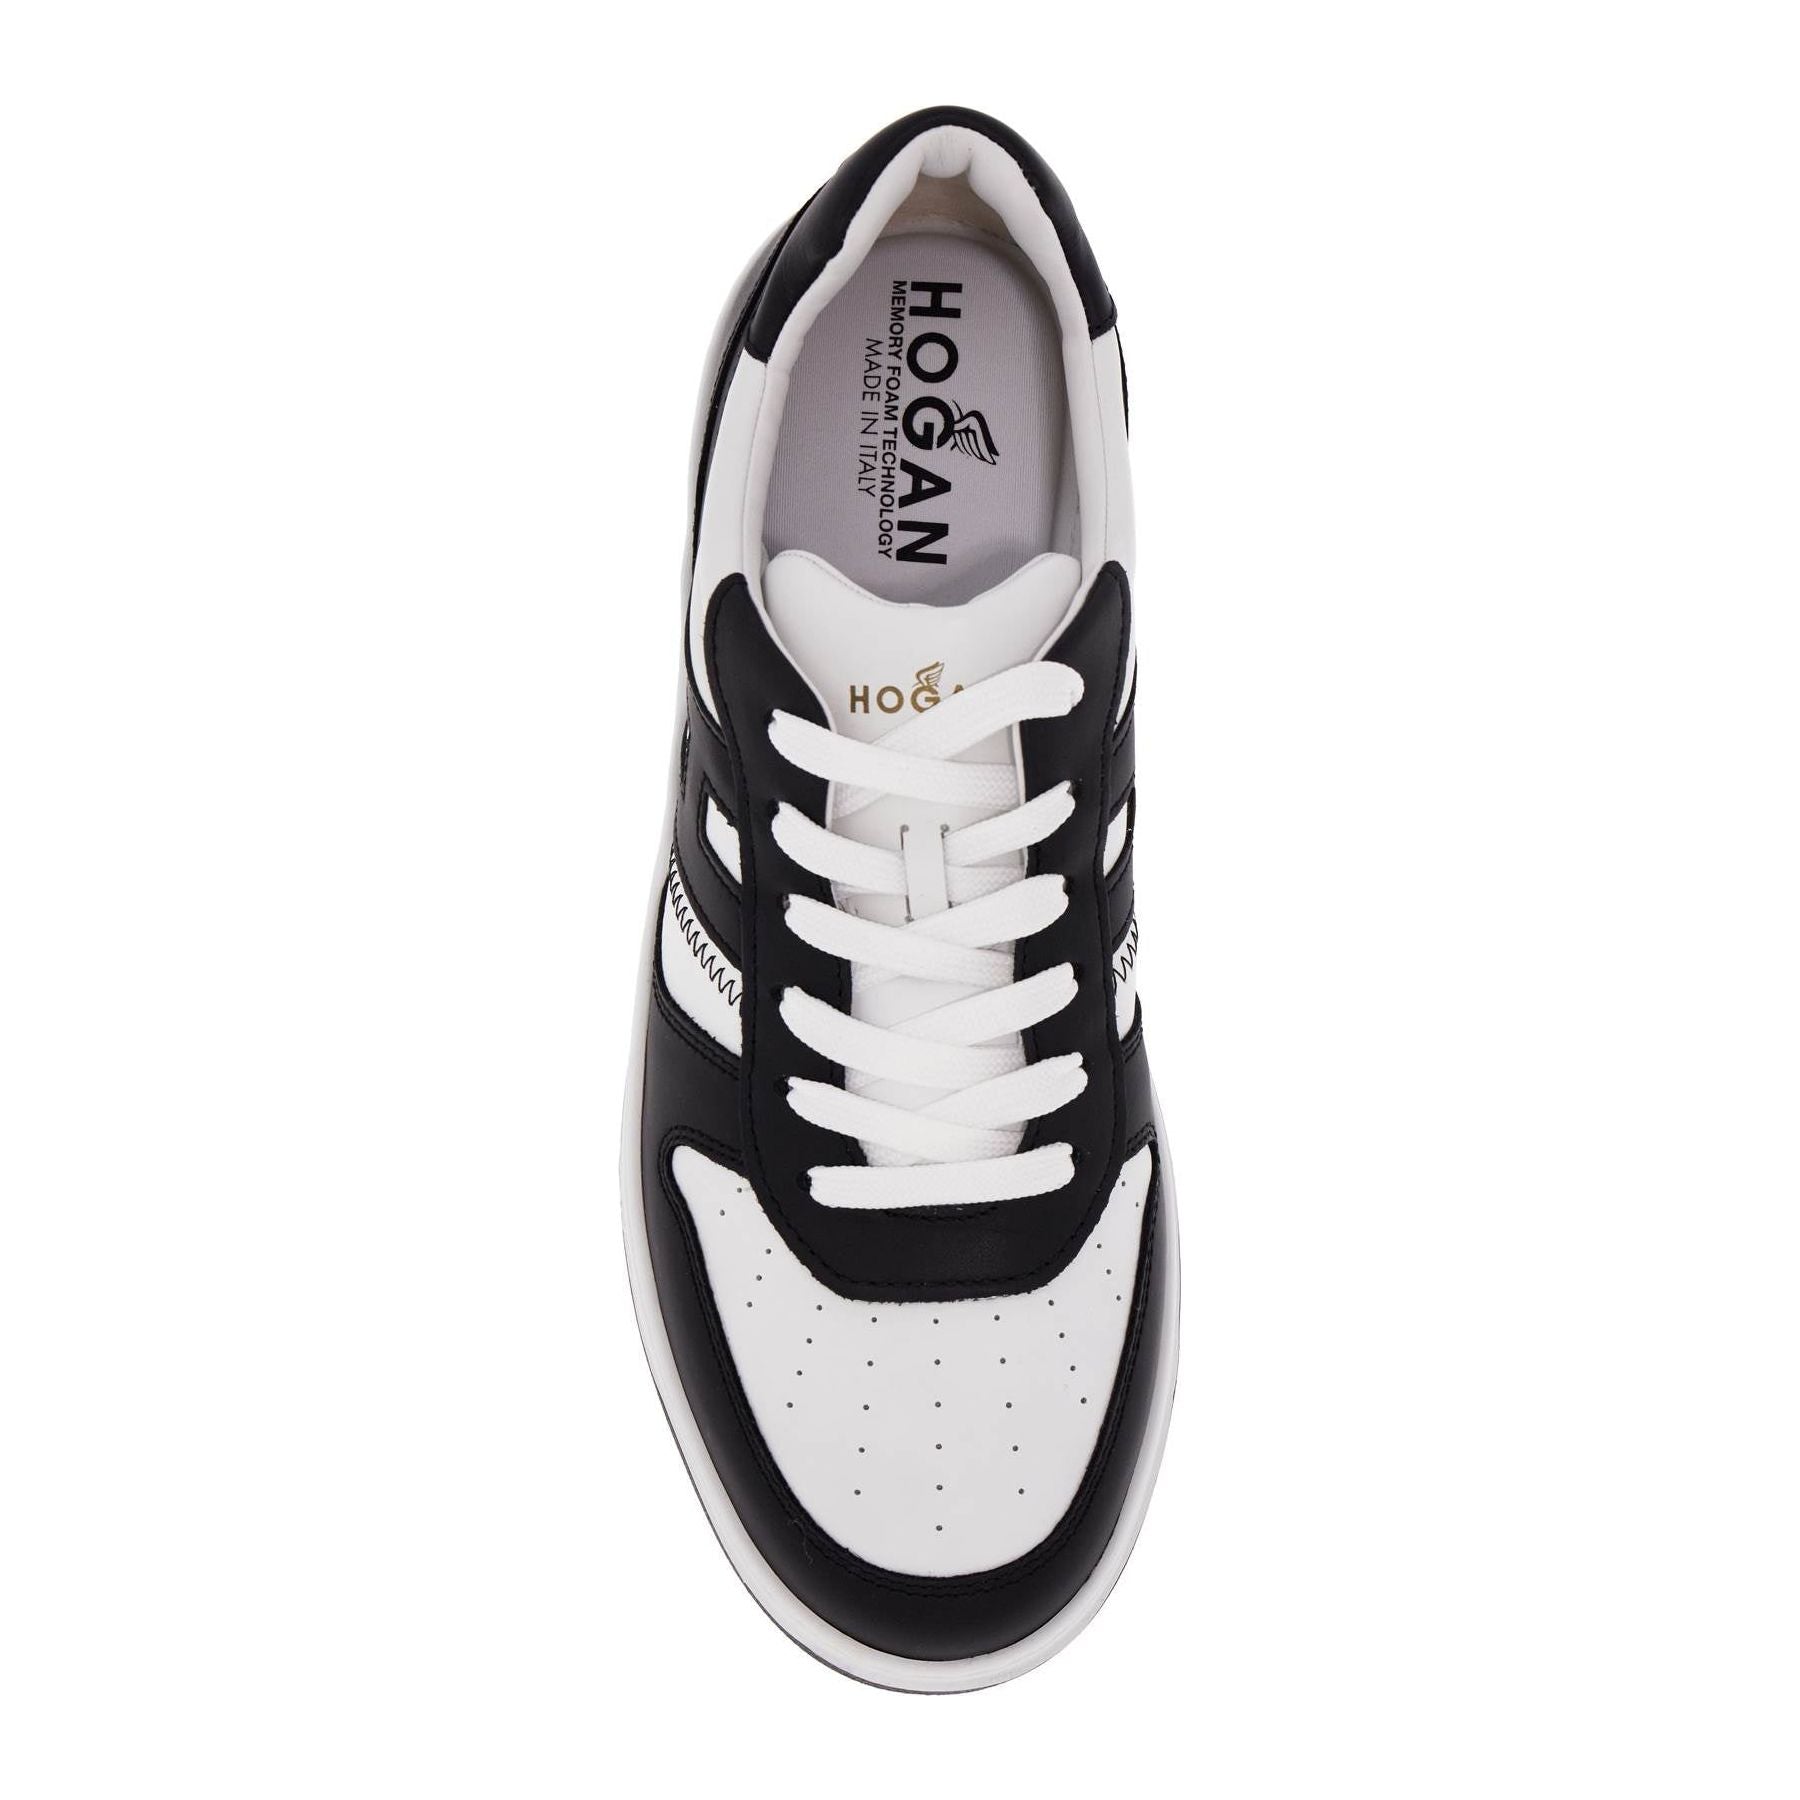 H630 Leather Sneakers